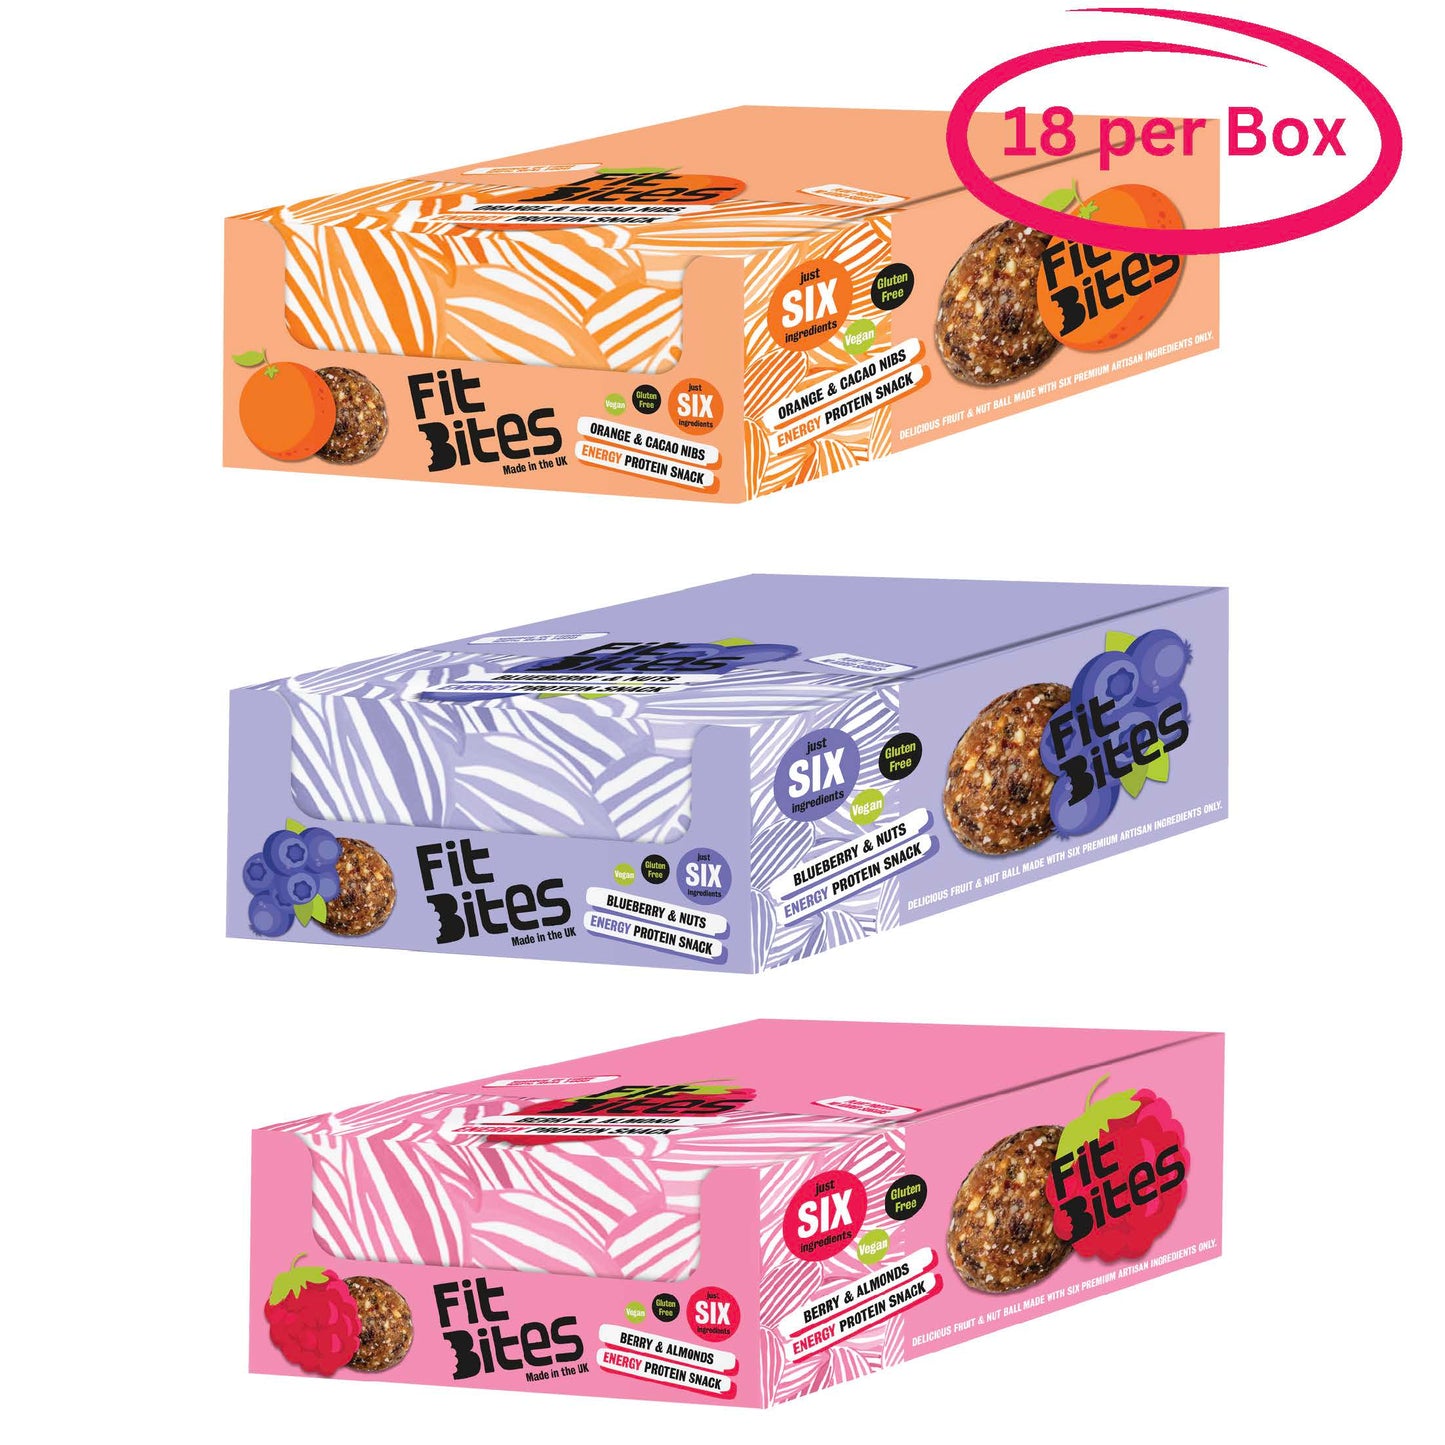 4. Berries + Almonds Energy & Protein 30g Snack Ball (Case of 18)